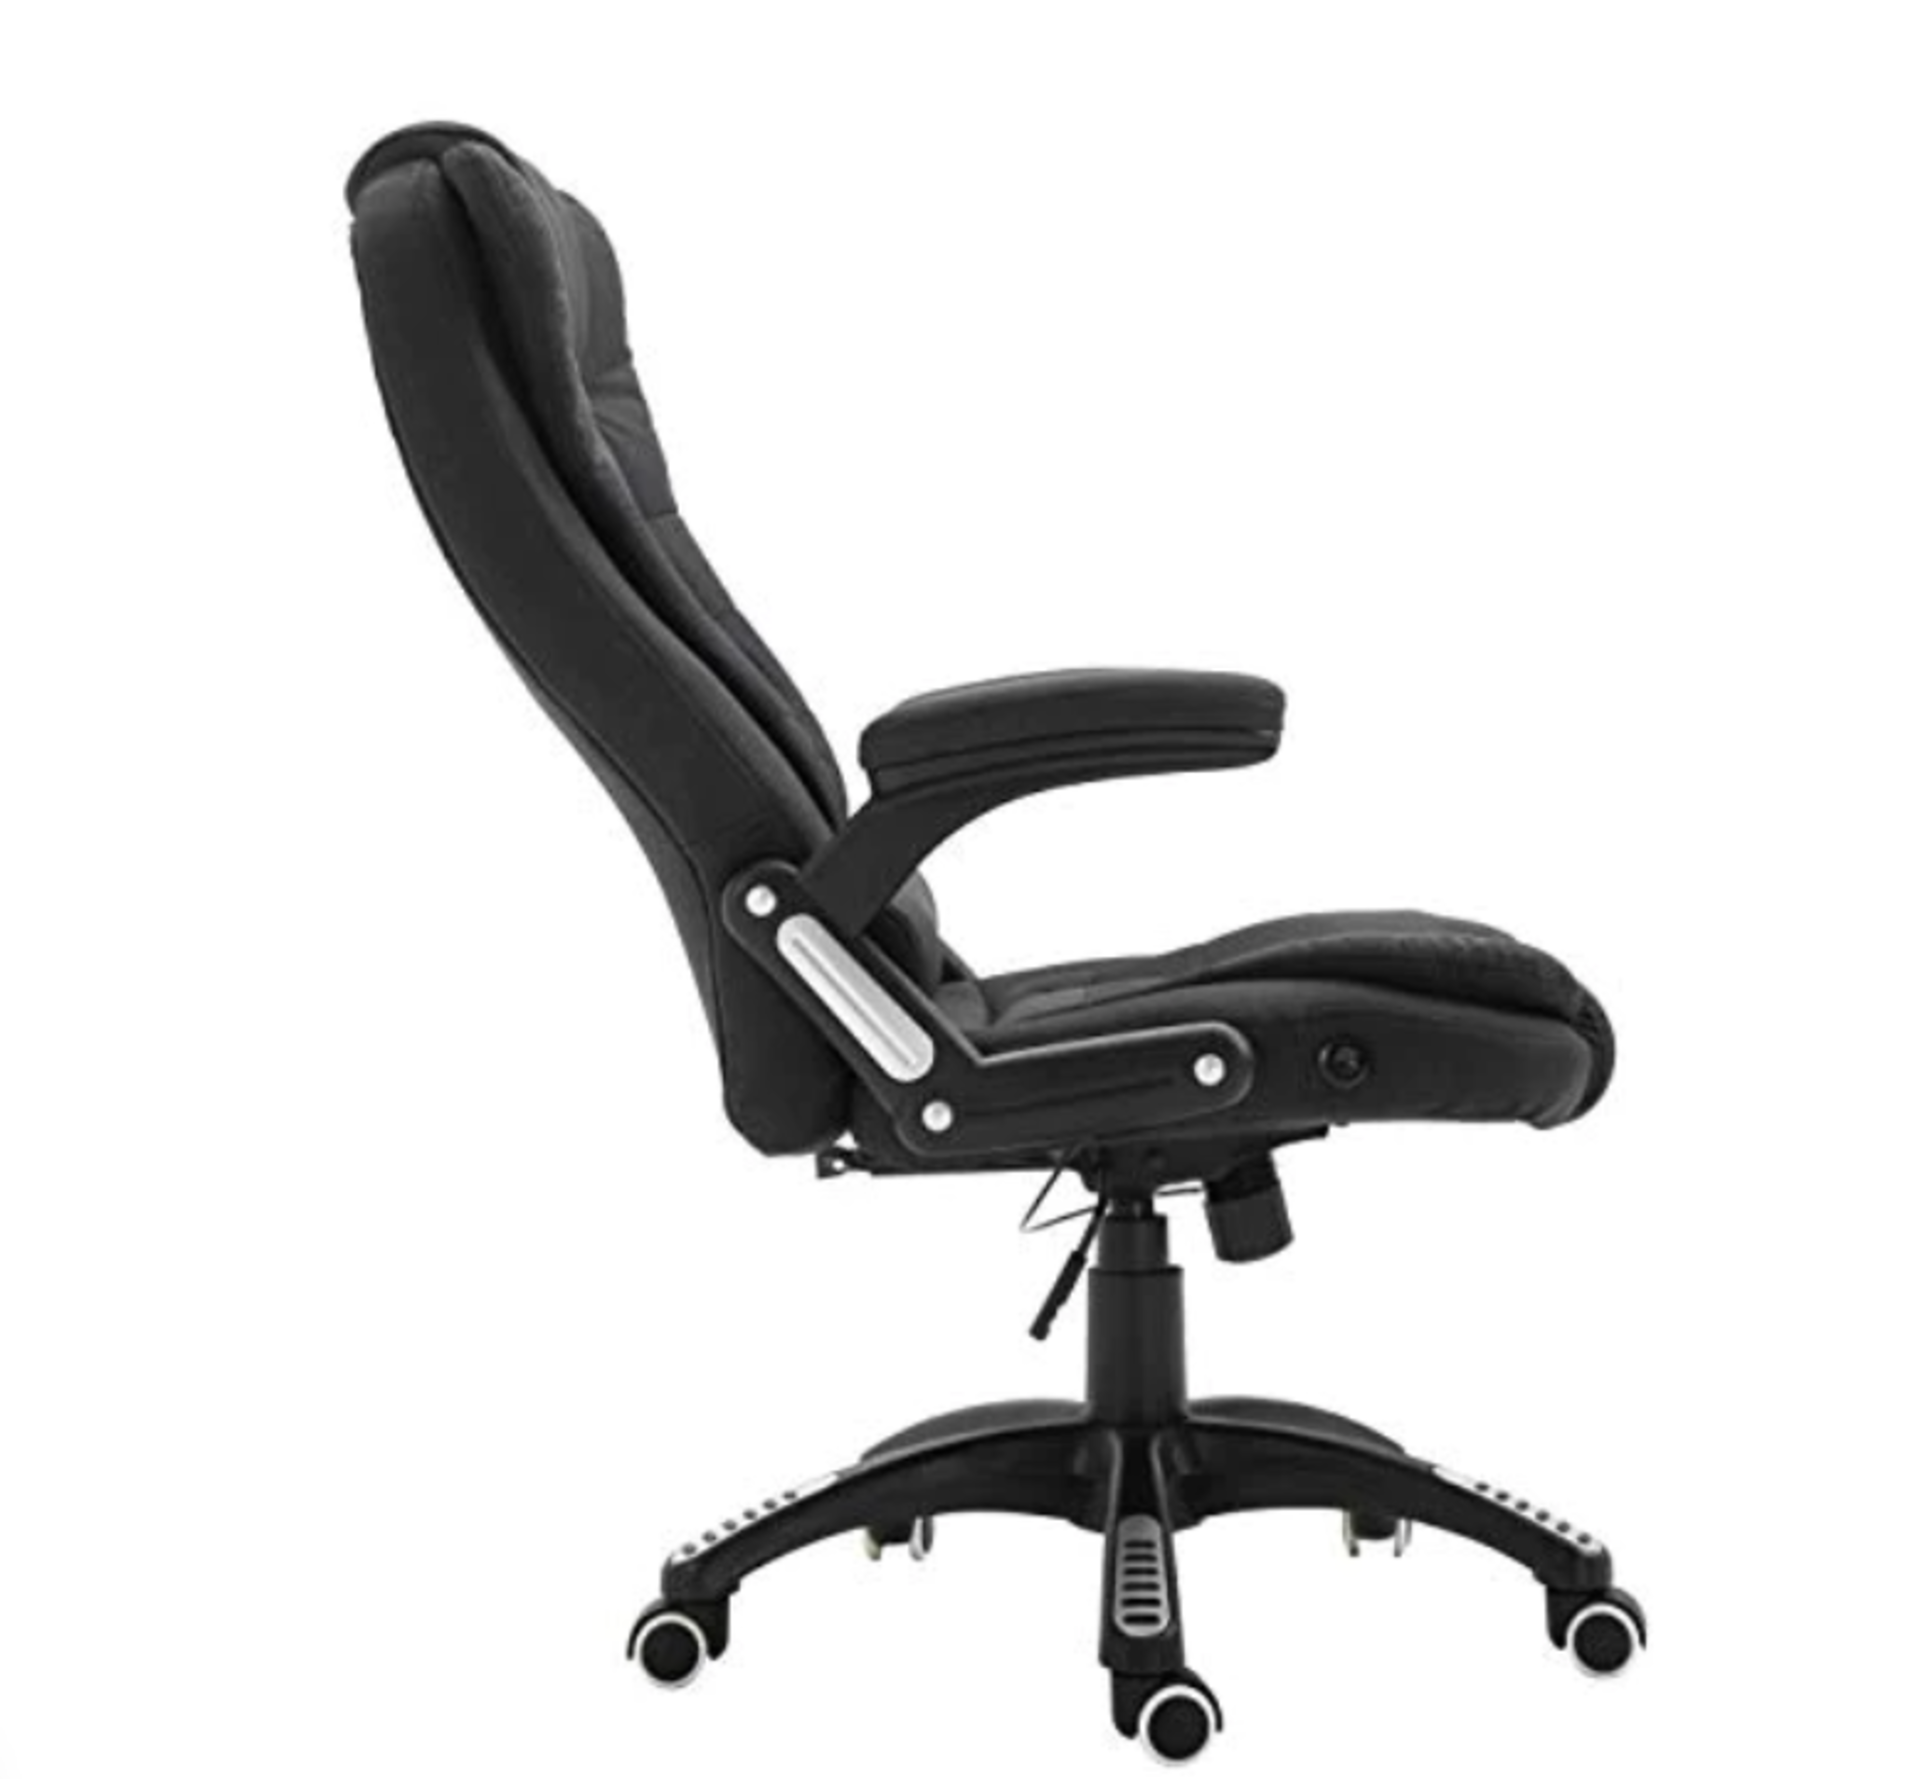 Cherry Tree Furniture Executive Recline Extra Padded Office Chair Standard, MO17 Black Fabric - SR6 - Image 2 of 2